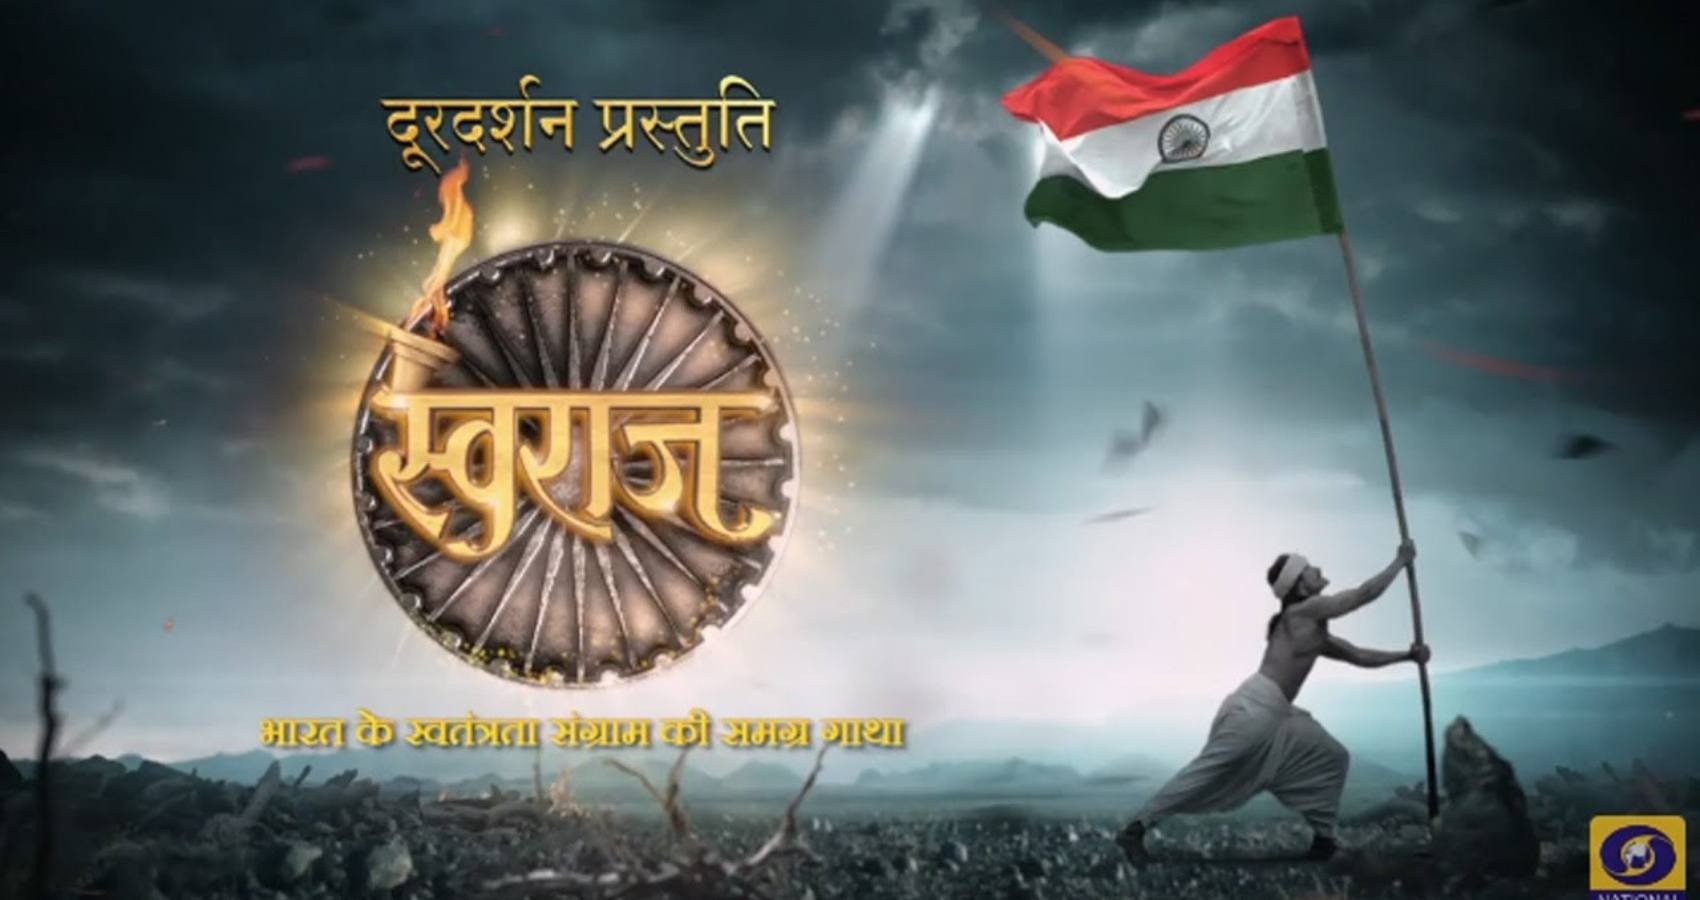 Doordarshan Launches “Swaraj,” A 75-Episode Serial On India’s Freedom Struggle